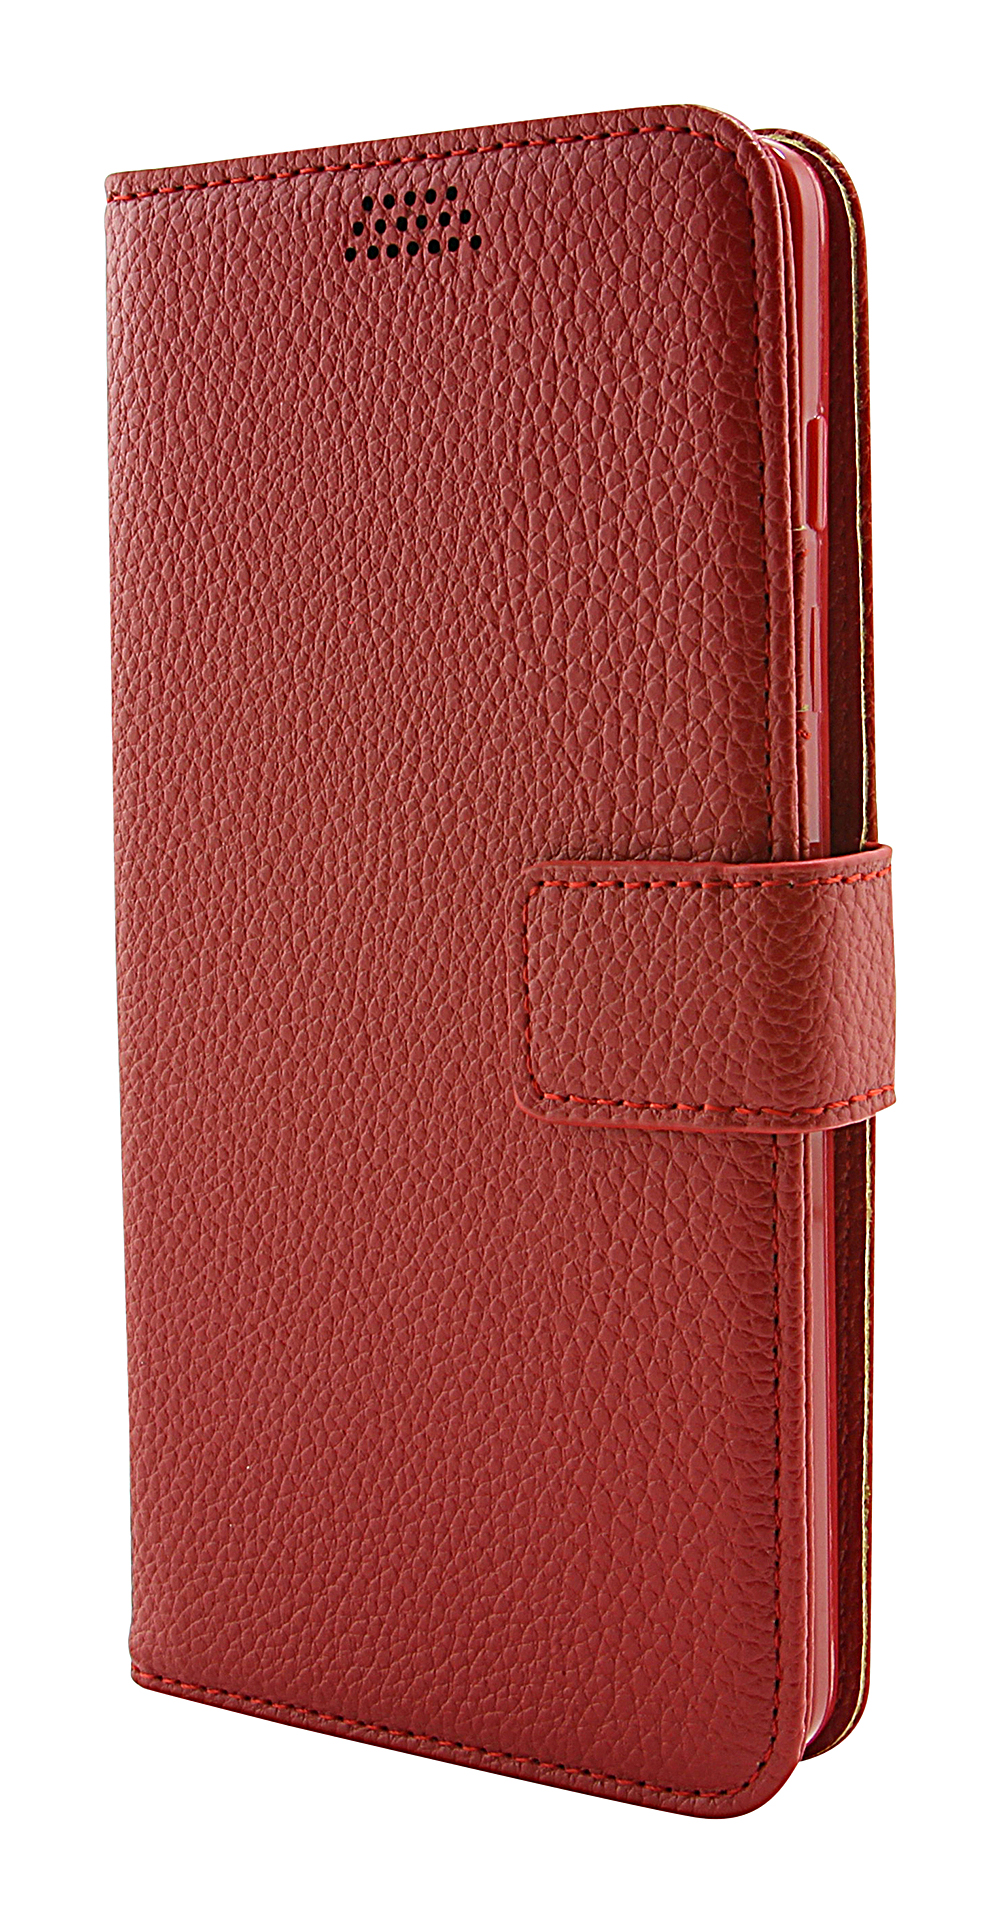 New Standcase Wallet Sony Xperia 1 (J9110)